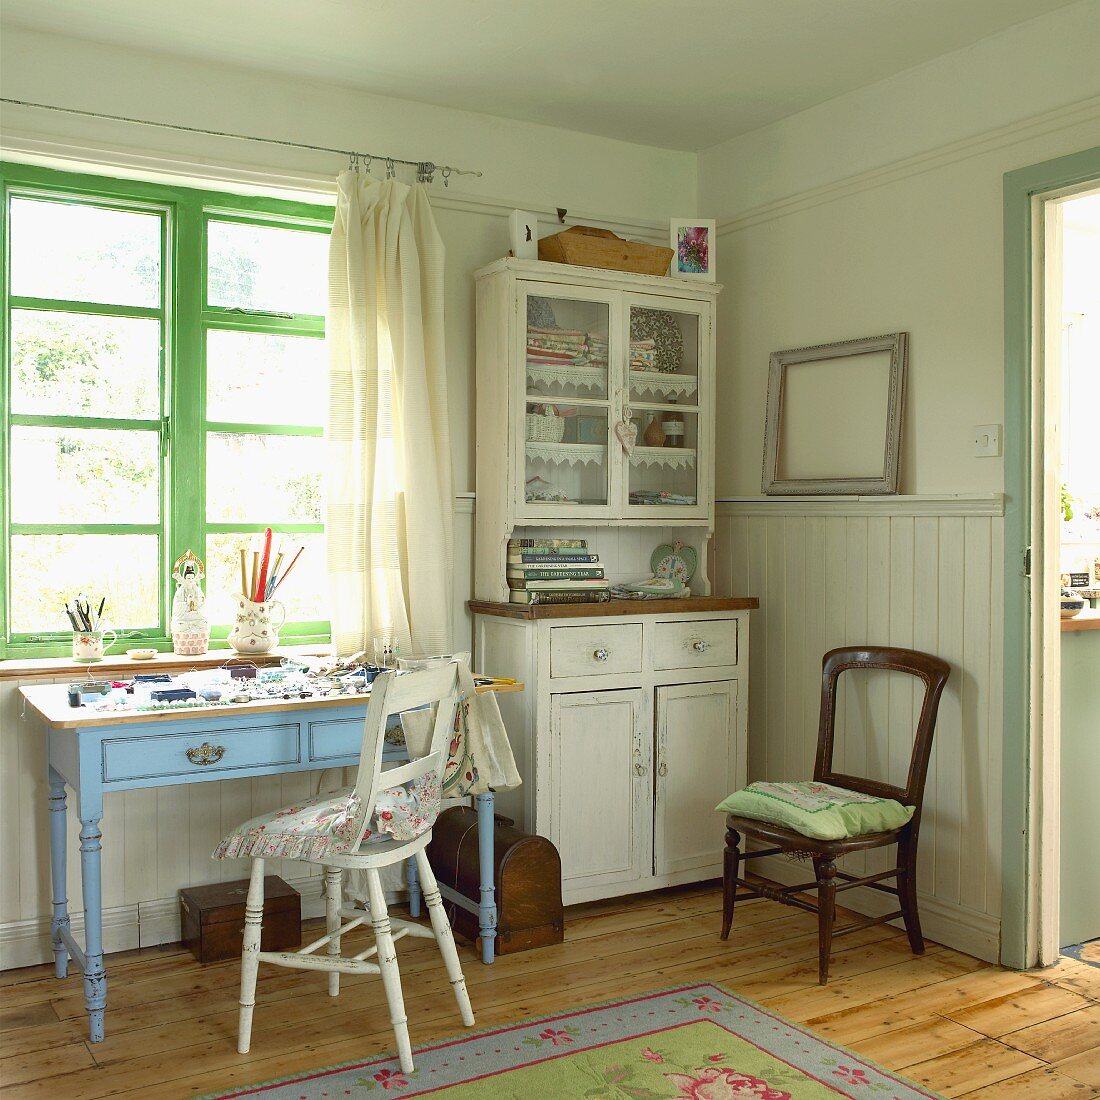 Interior in pastel shades with half-height wooden panelling, glass-fronted dresser and small table with drawers below window with green-painted frame